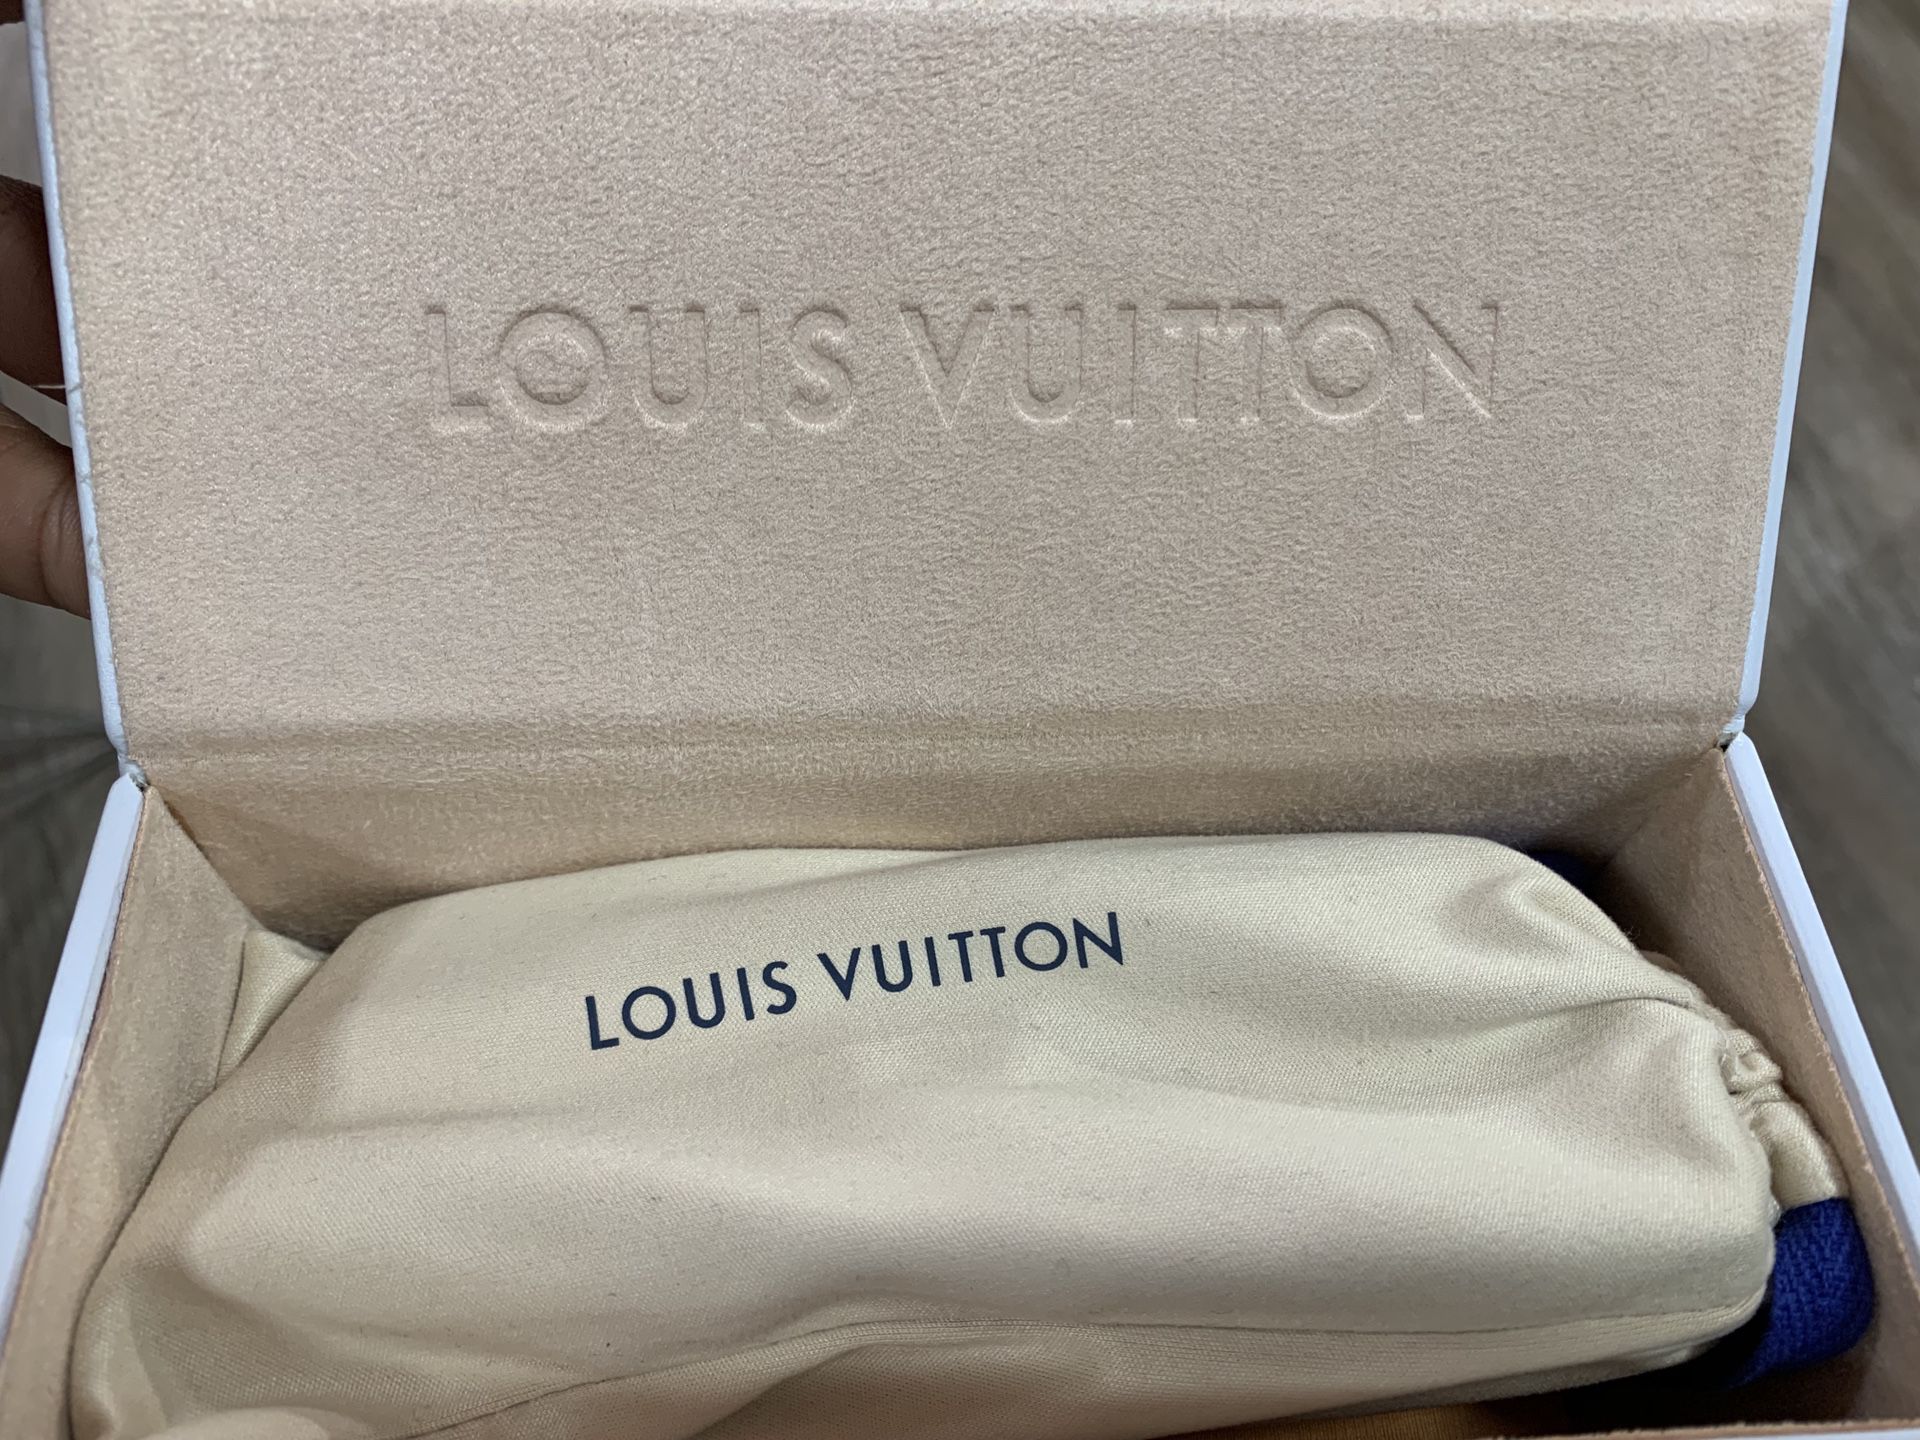 Louis Vuitton 1.1 Millionaire Sunglasses for Sale in Bronx, NY